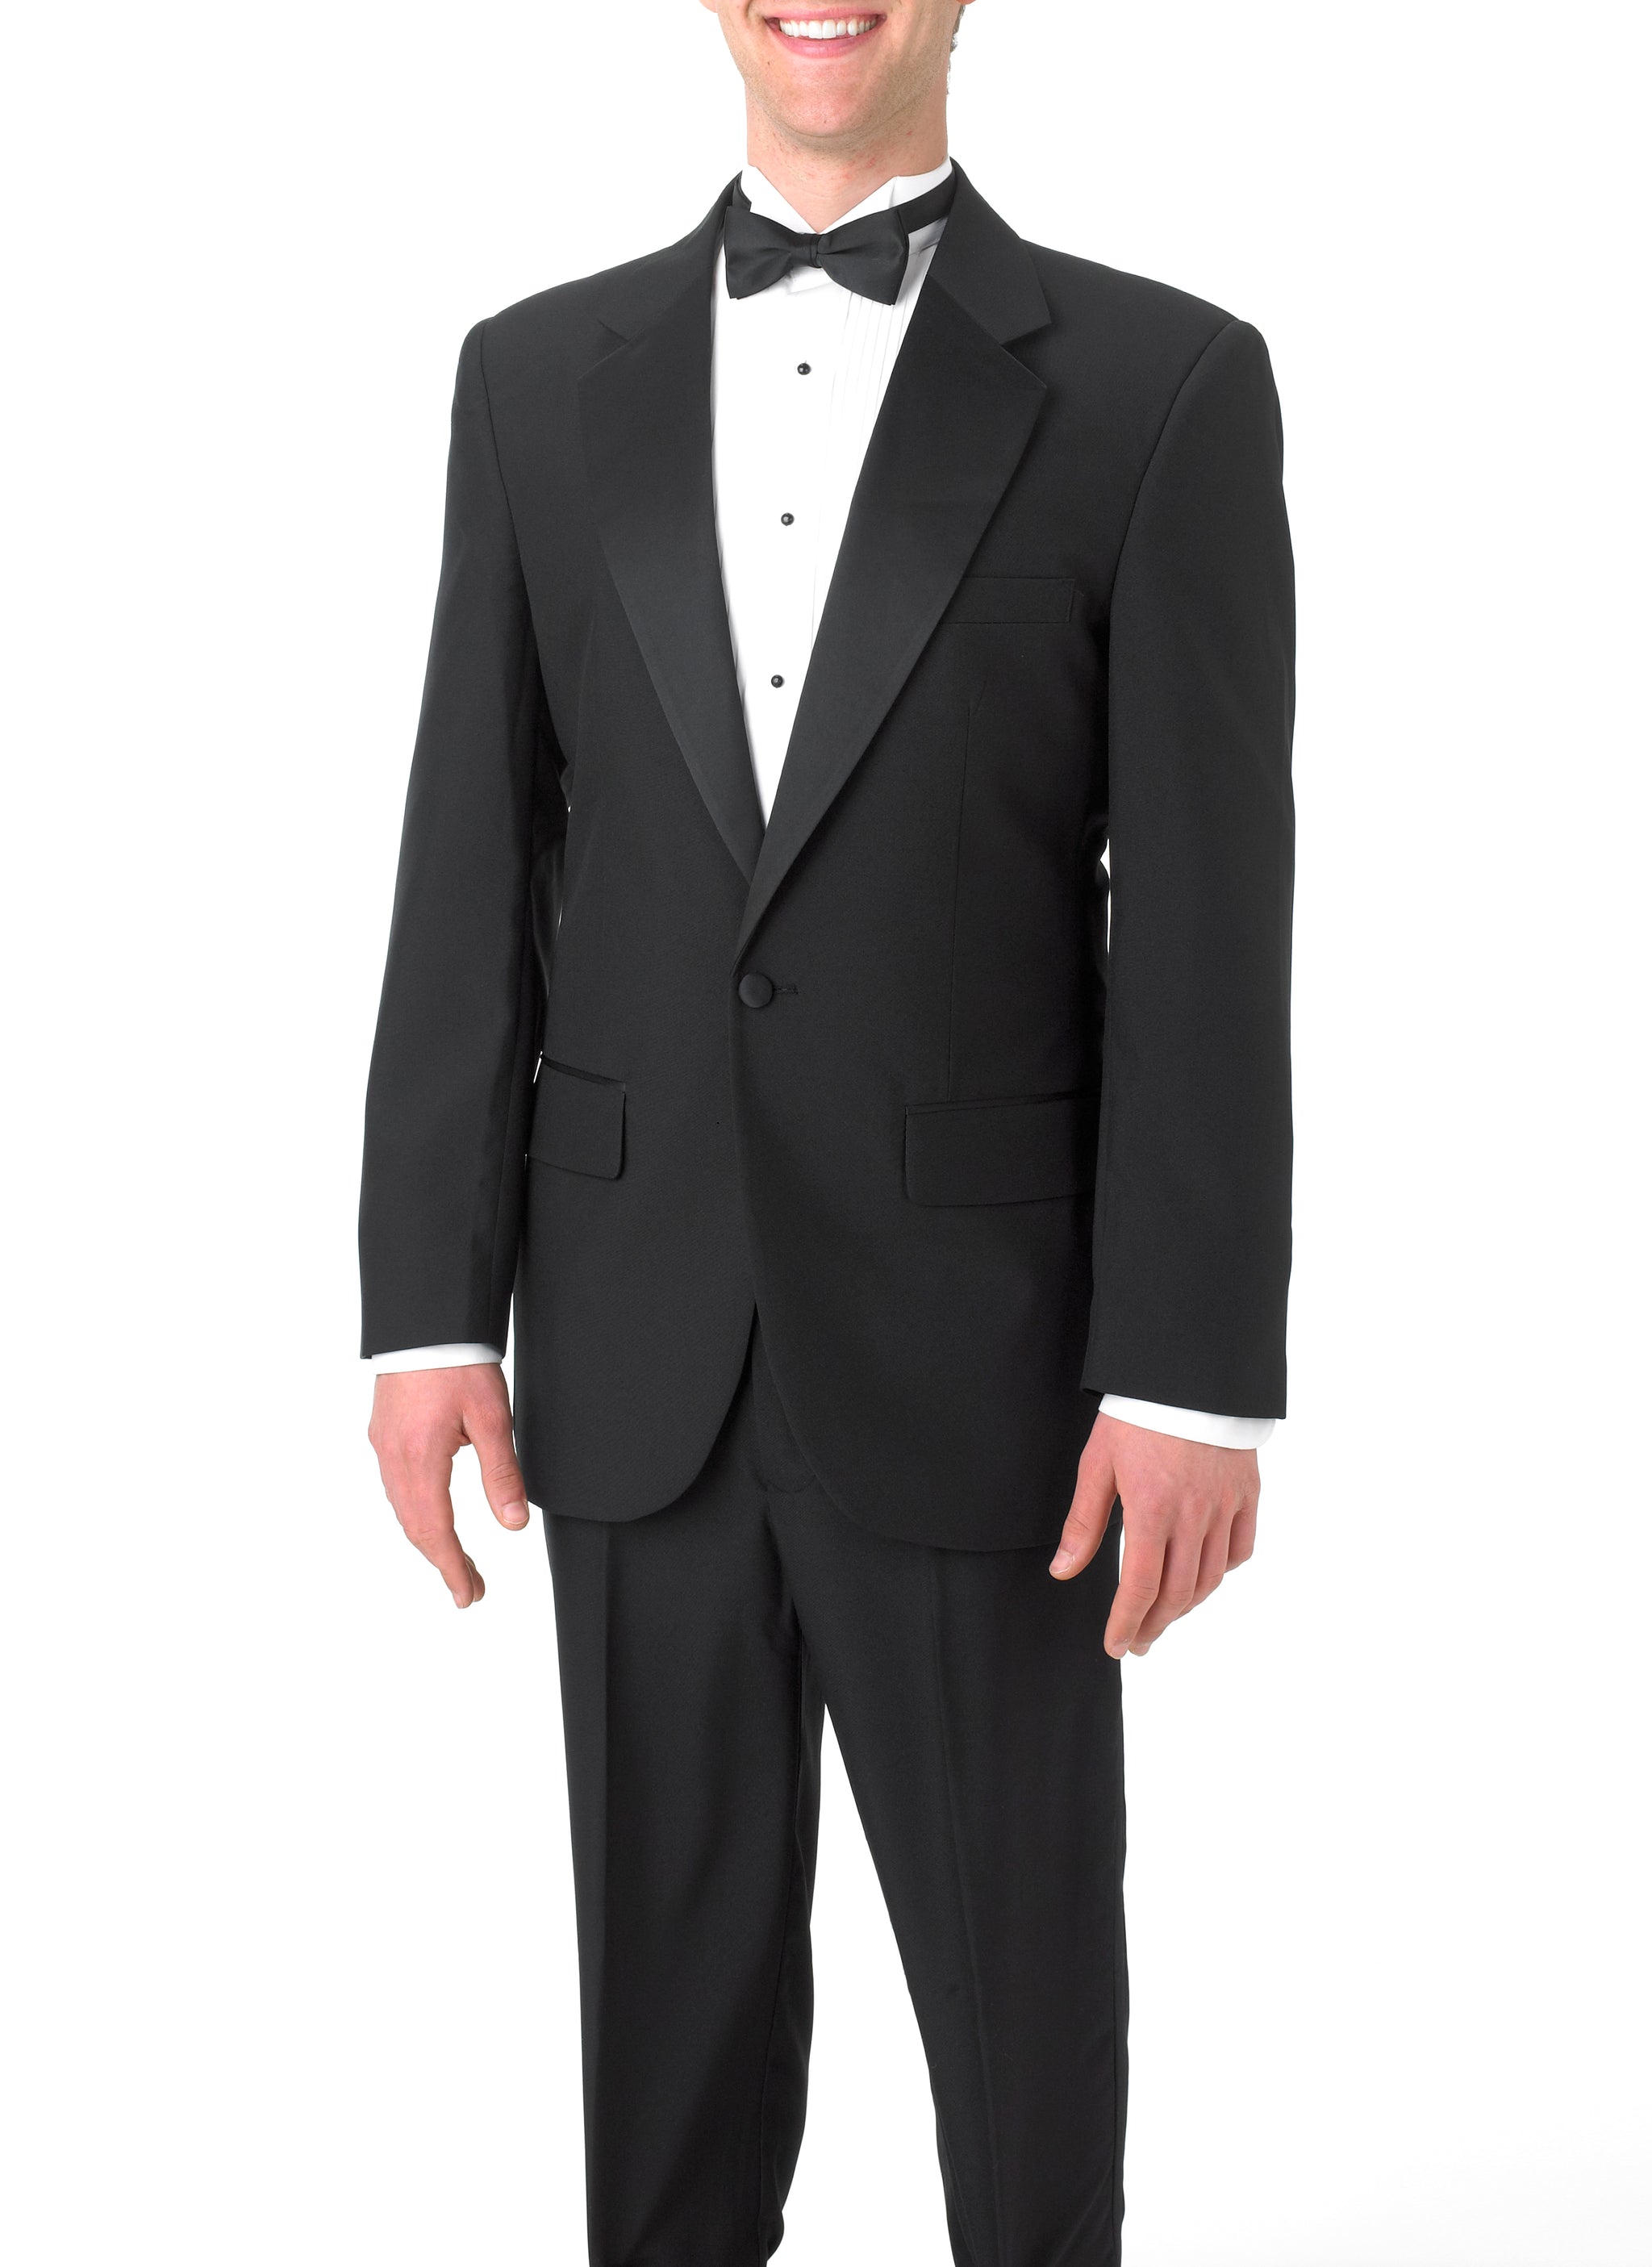 Buy The Perfect Tuxedo For Any Occasion! Starting from $169.99